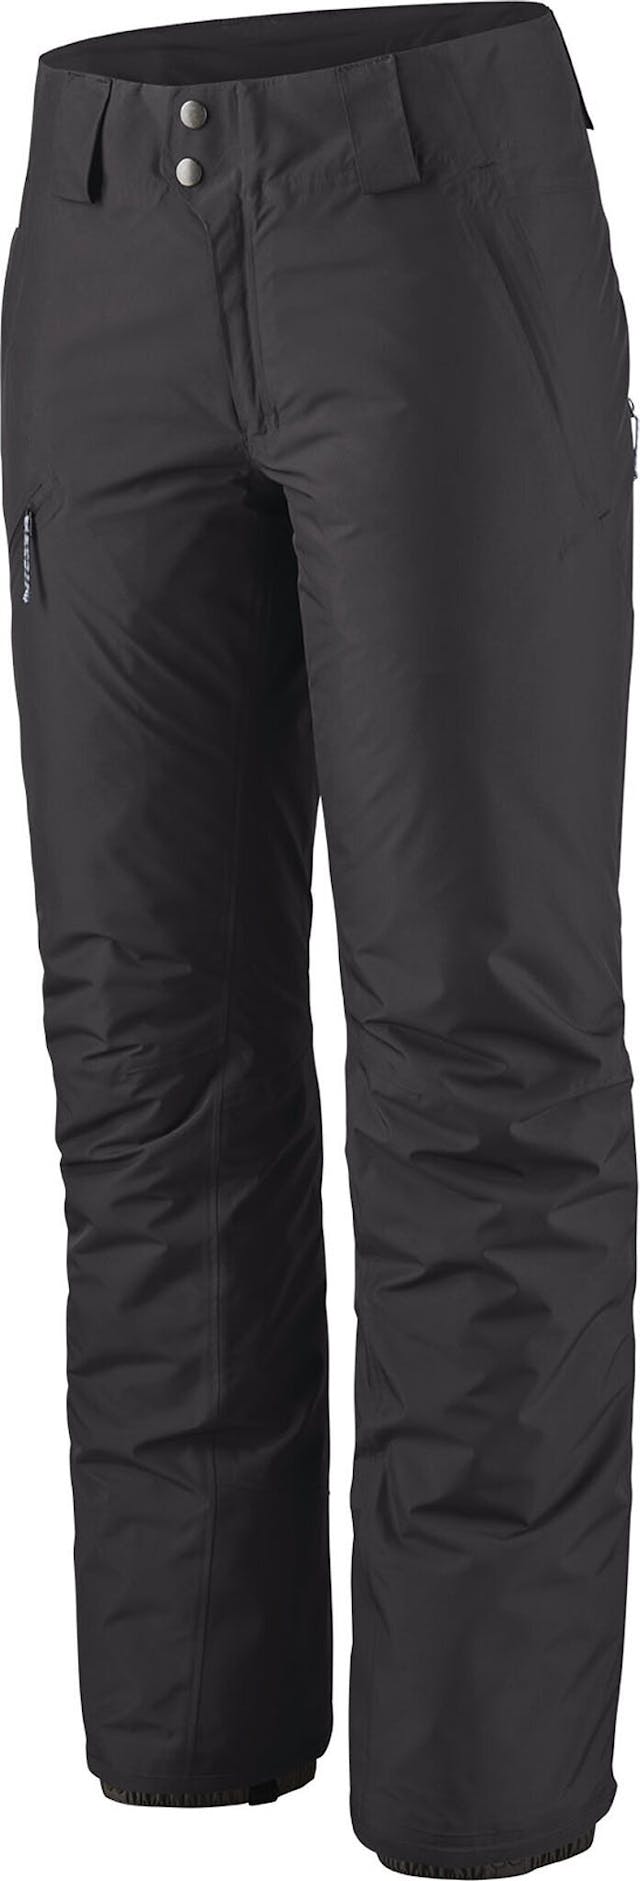 Product image for Insulated Powder Town Pants - Regular- Women's